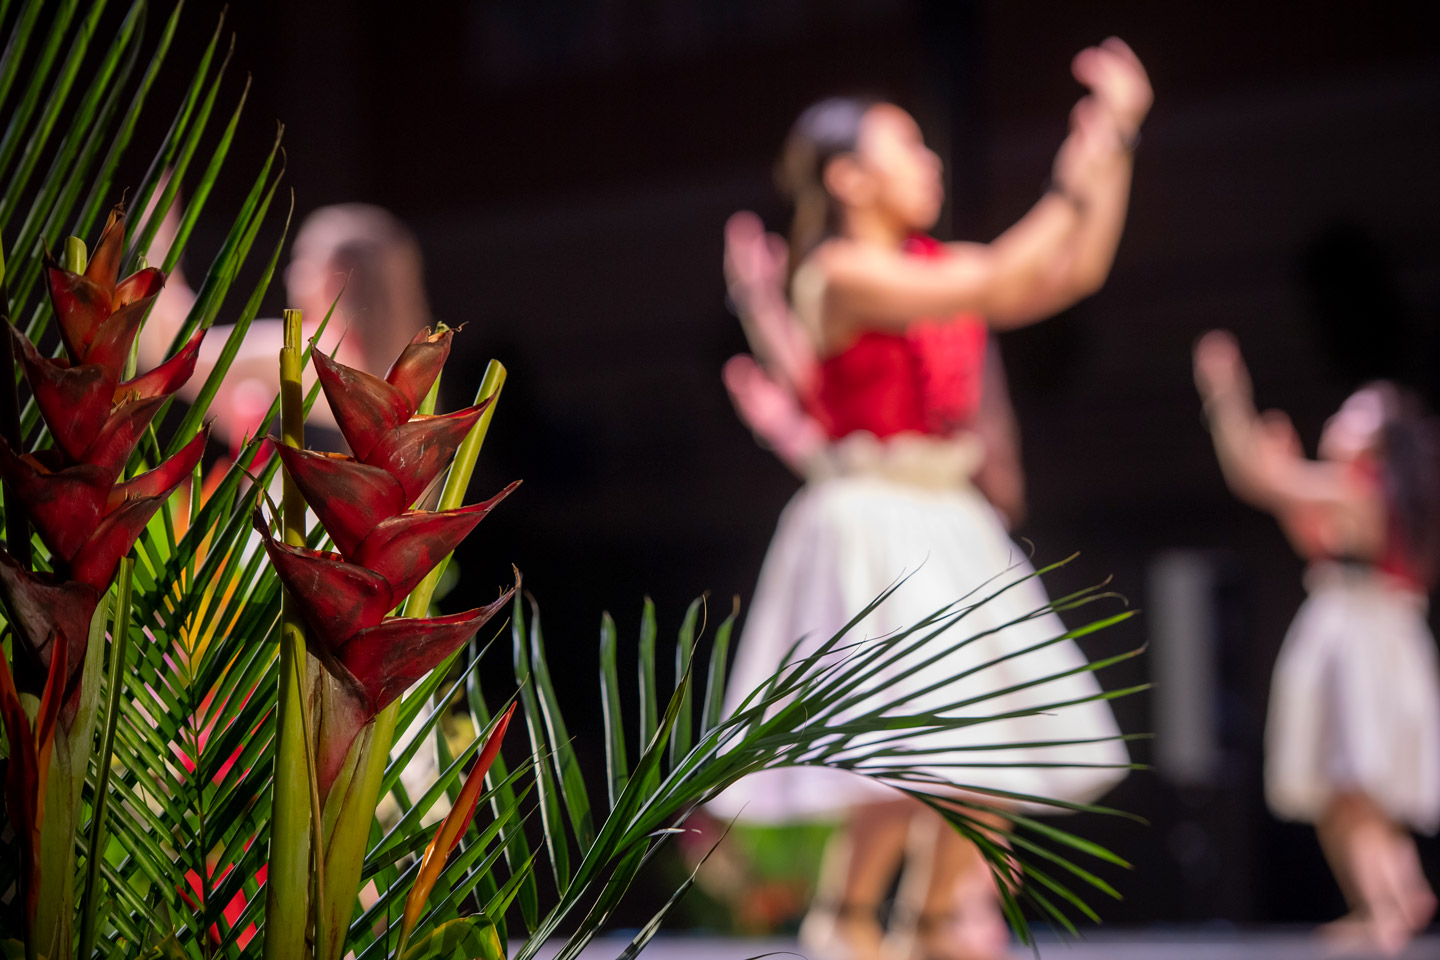 dancers on the stage at the lu'au surrounded by Hawaiian floral decorations